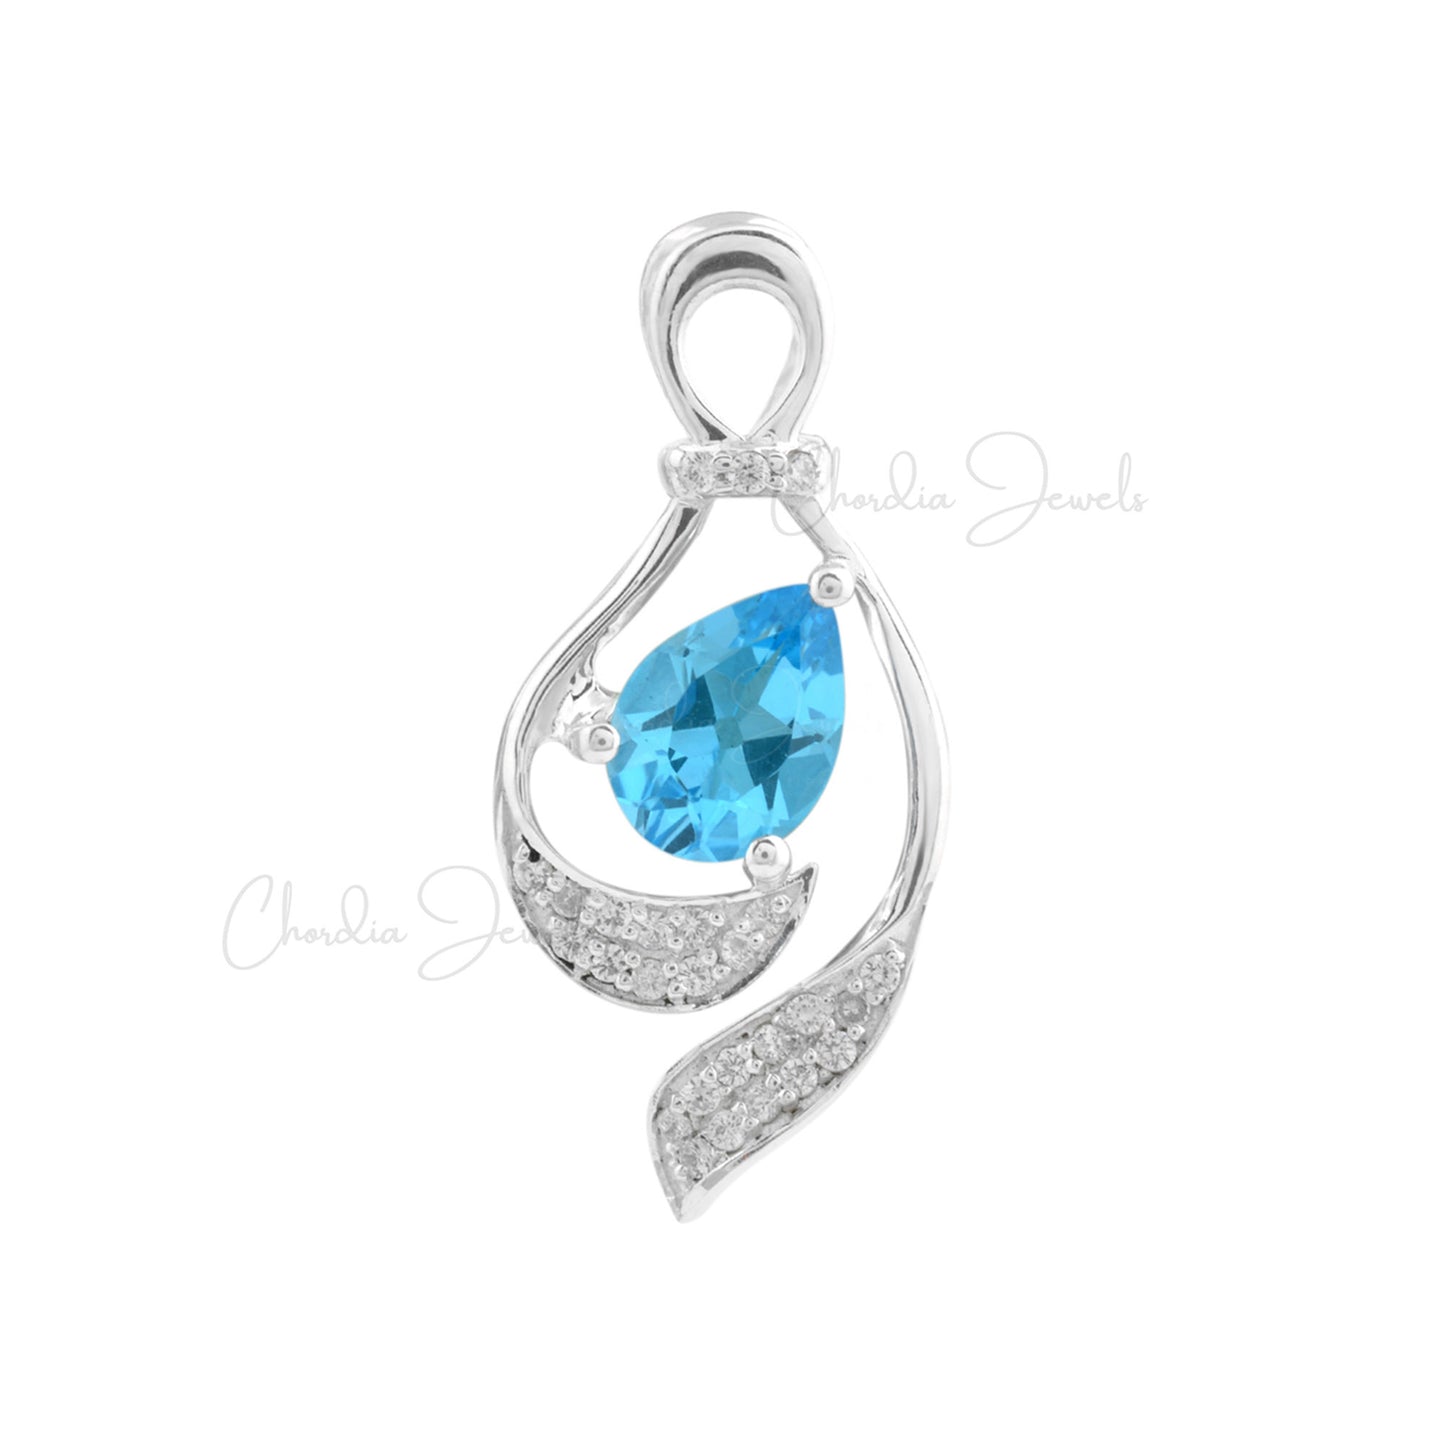 Natural Swiss Blue Topaz Pendant AAA Quality Jewelry At Offer Price 925 Sterling Silver December Birthstone Jewelry